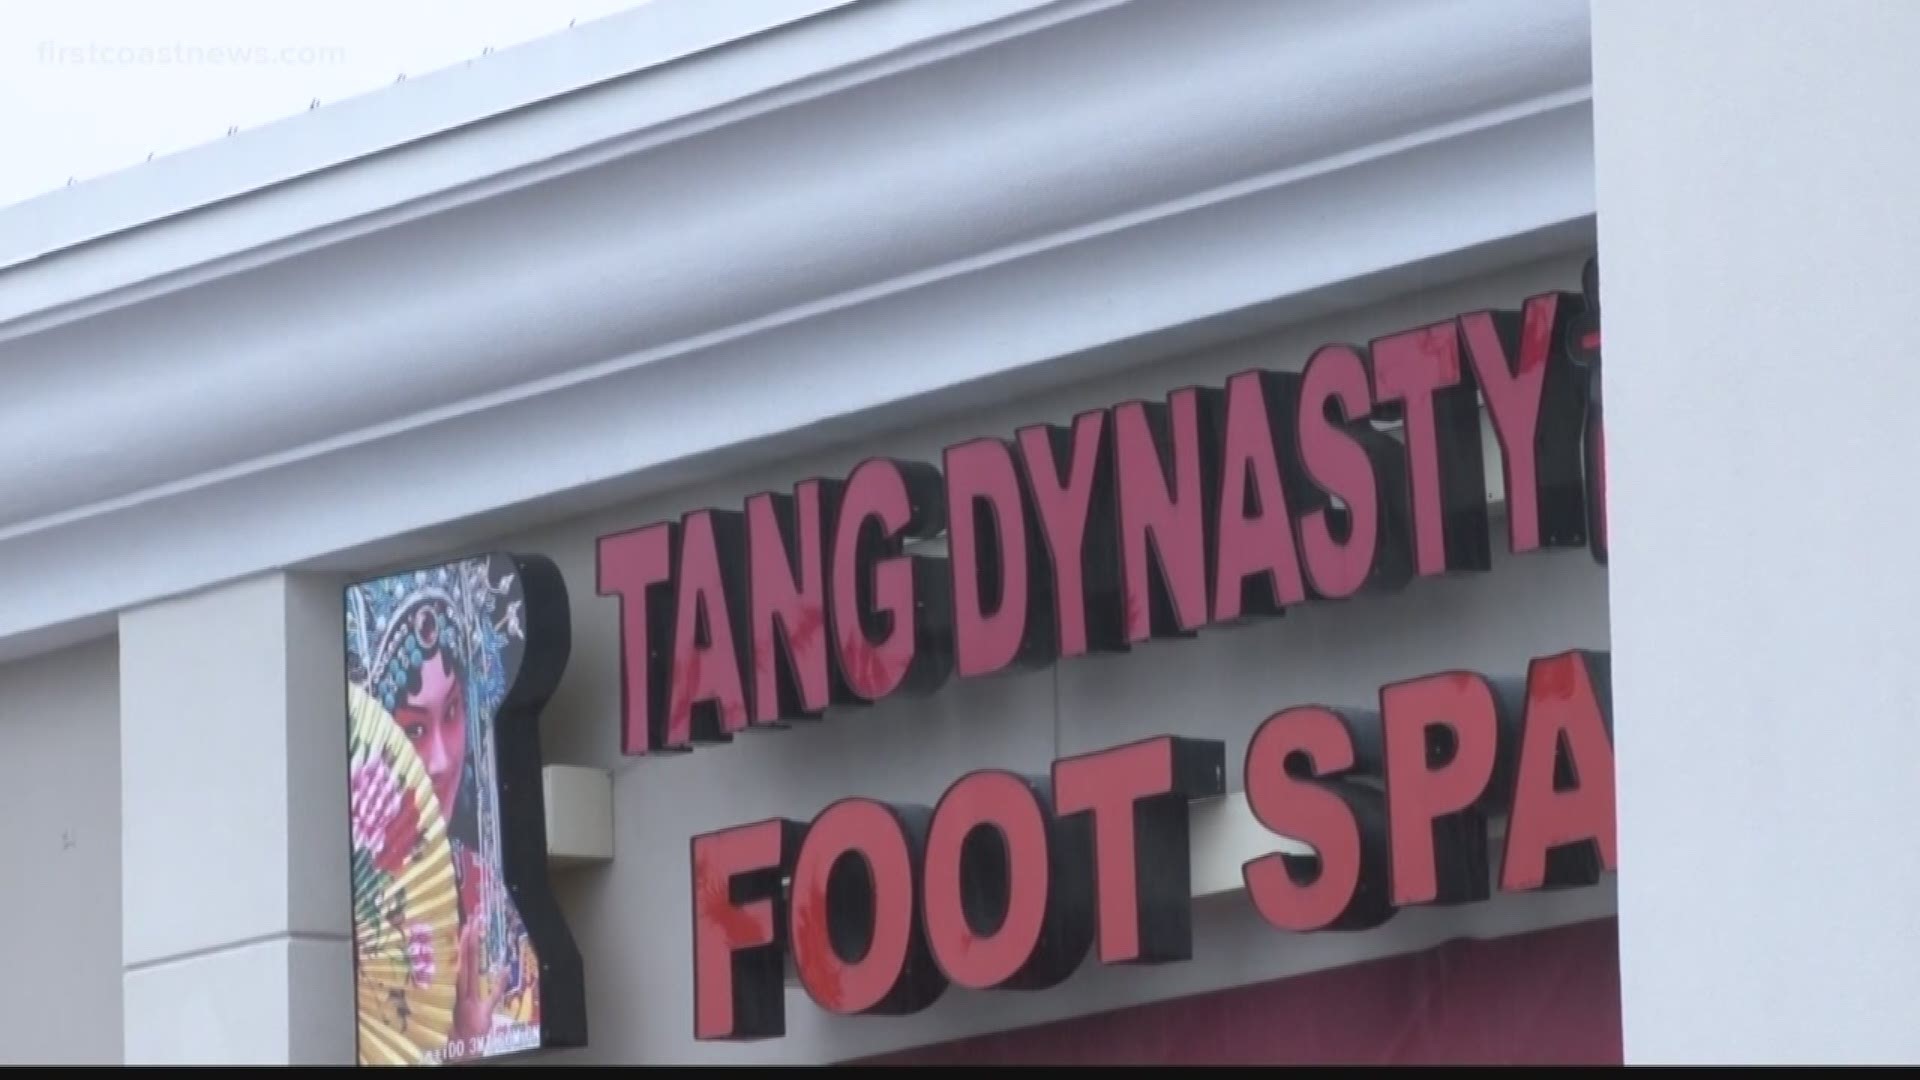 The Department of Homeland Security Investigations said they were supporting the Jacksonville Sheriff's Office with a law enforcement action at Tang Dynasty Foot Spa